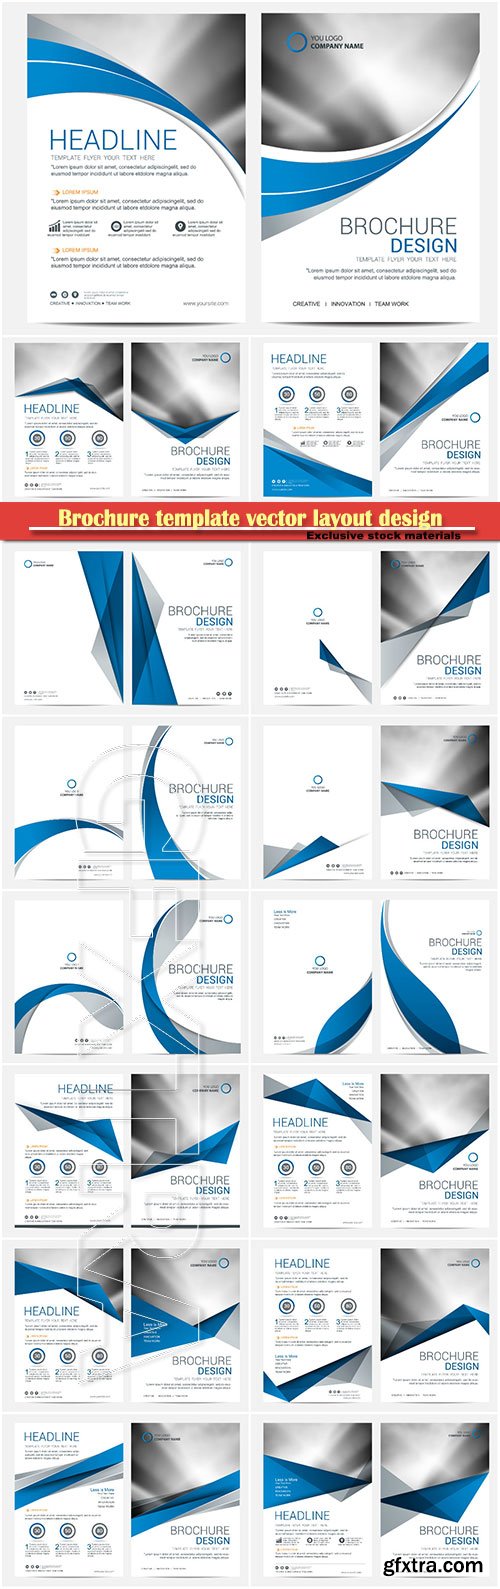 Brochure template vector layout design, corporate business annual report, magazine, flyer mockup # 152